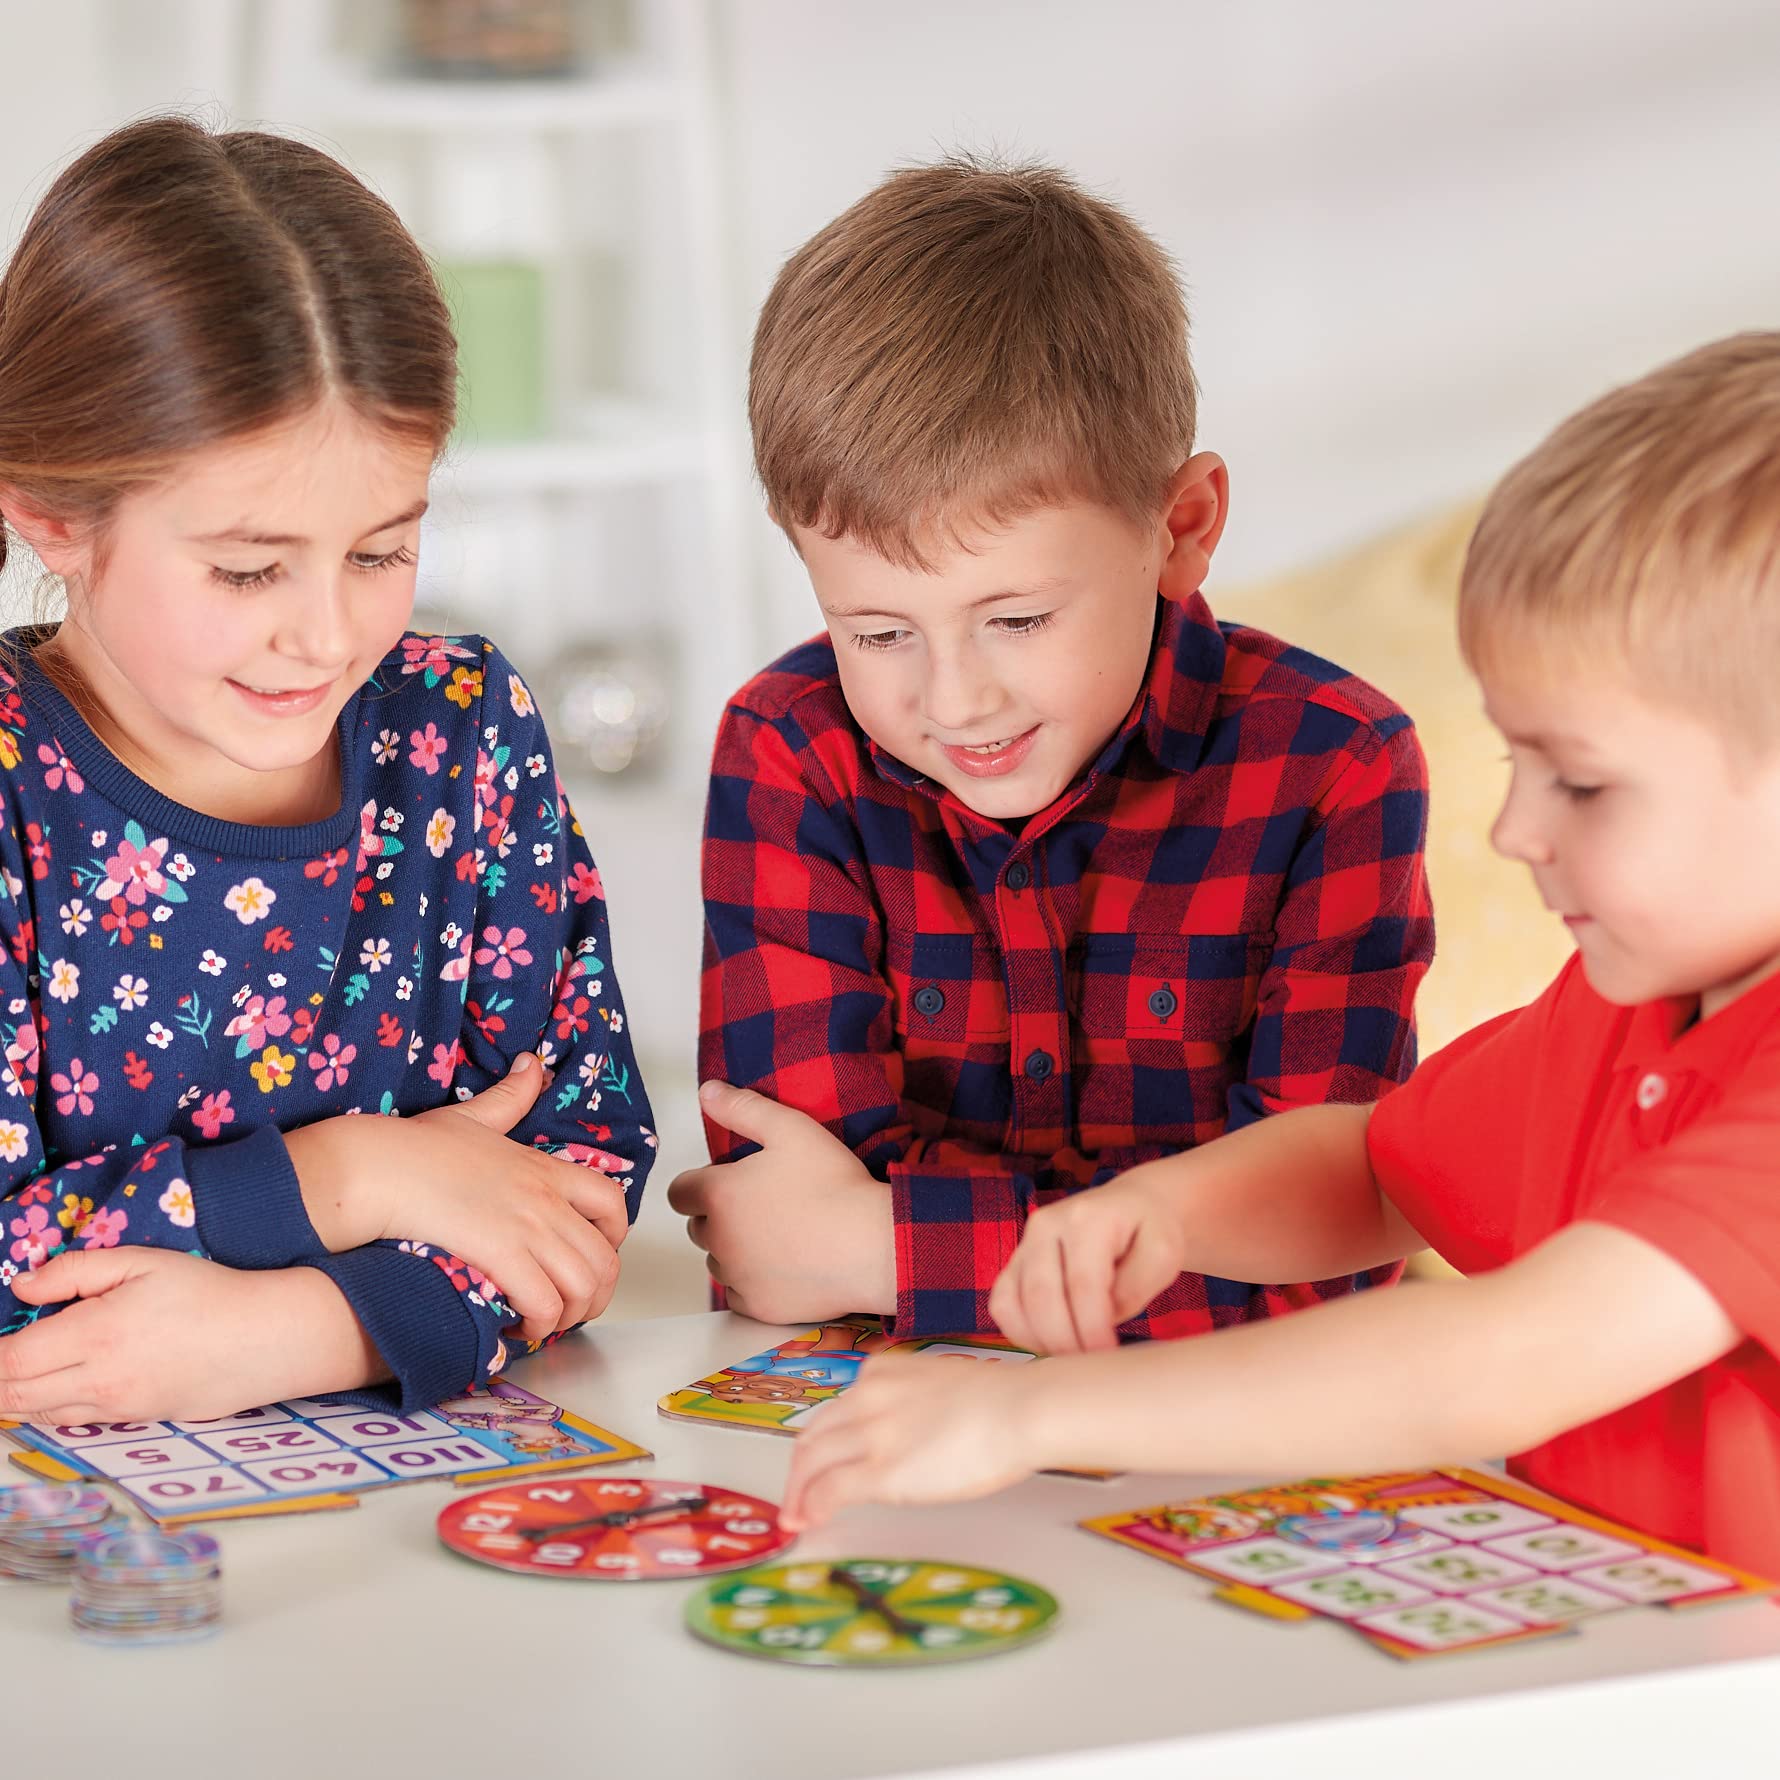 Orchard Toys Moose Games Times Tables Heroes. an exciting Multiplication Game , Superhero Play. for Ages 6-9 and for 2-4 Players